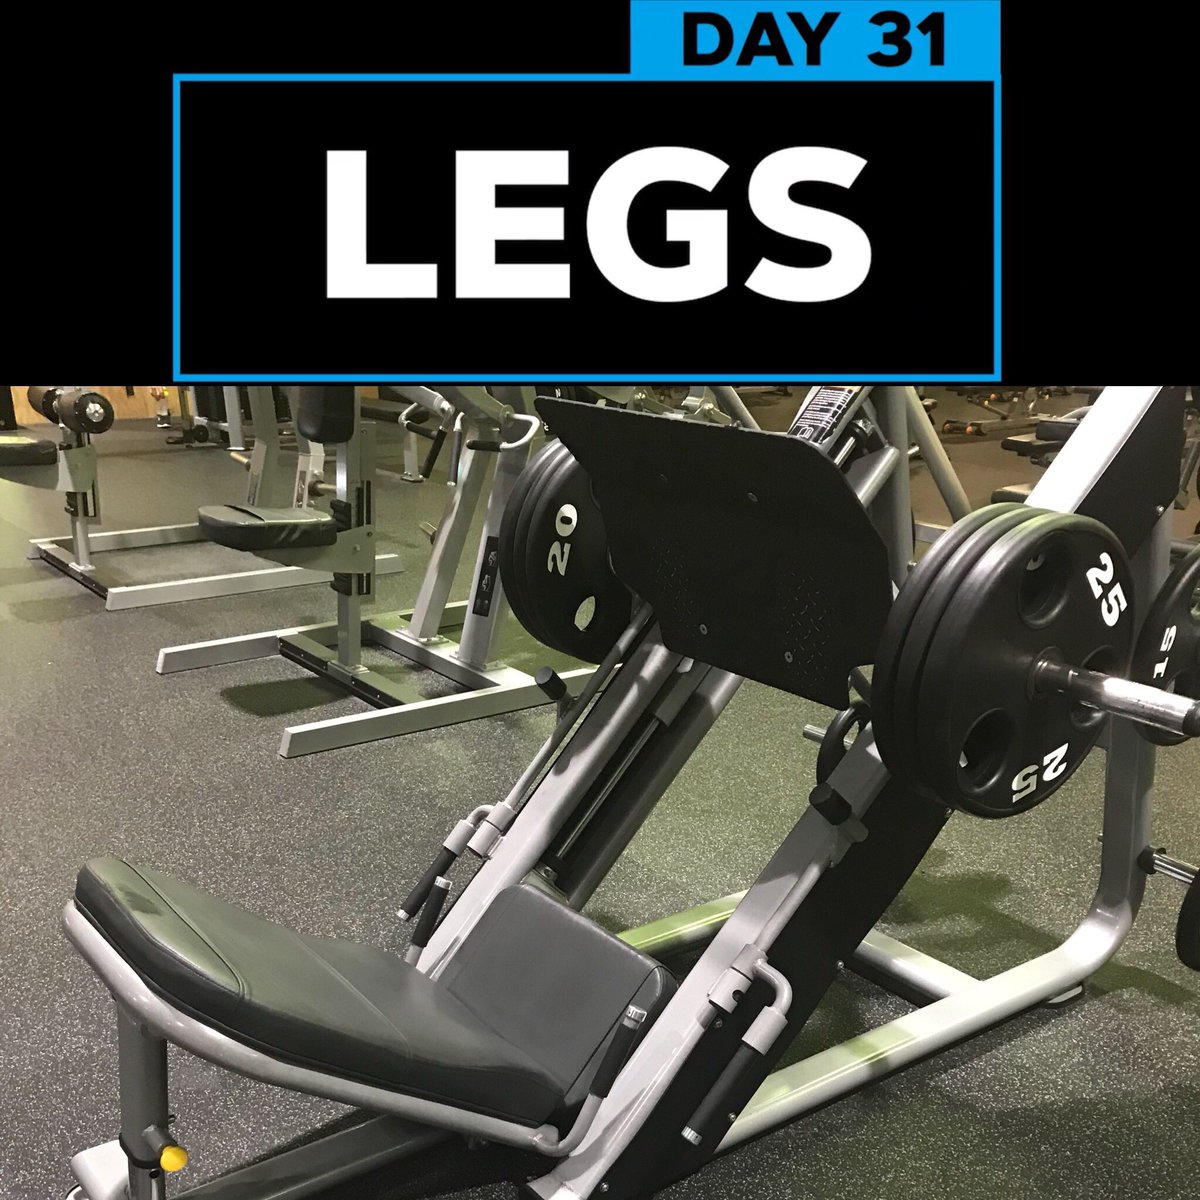 Cant feel my legs now!
#fitness #fitnessmotivation #fitnessgoals #fitnessquotes #fitnessinspiration #instafit #instafitfam #instagram #instagood #instafitness #fit #asthetics #gymtime #fitlifestyle #competitions #fitfam #instalean #instaworkout #whereisyourlimit #metodo180